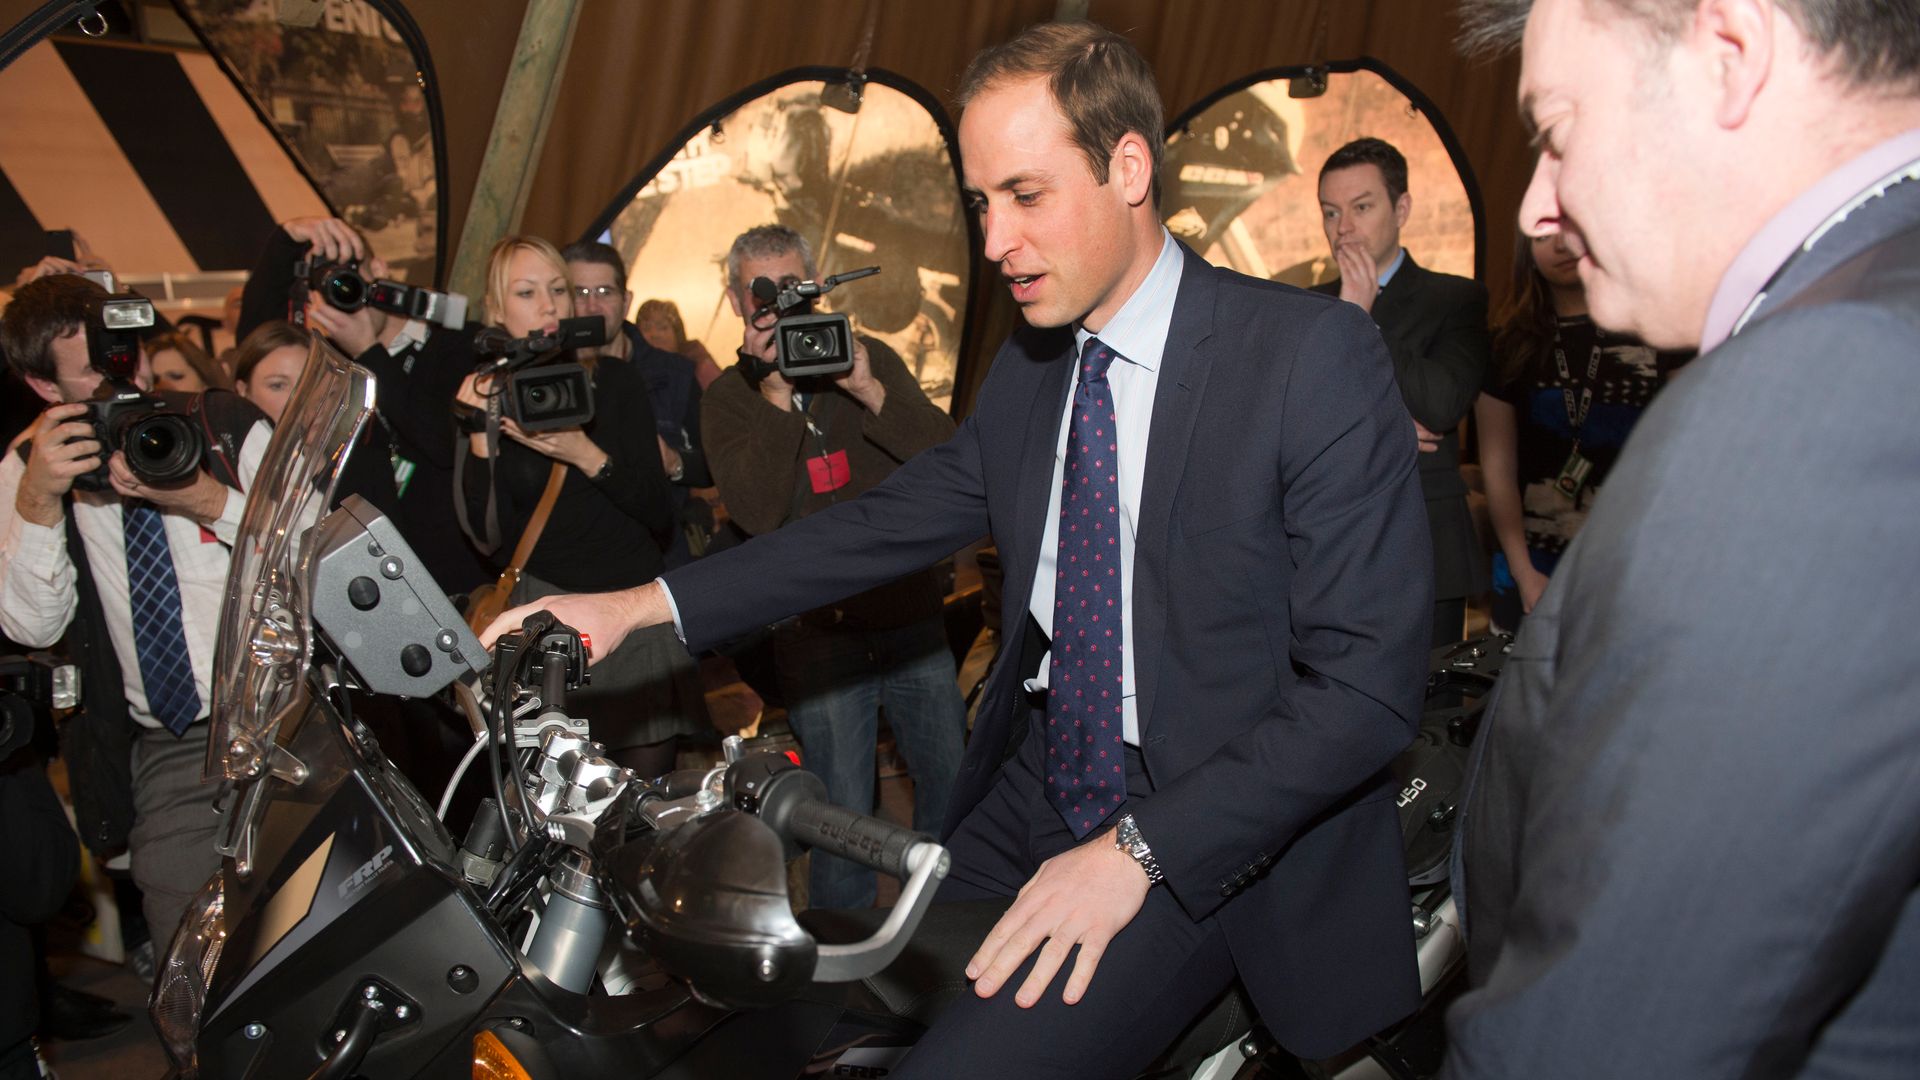 Prince William on a motocycle